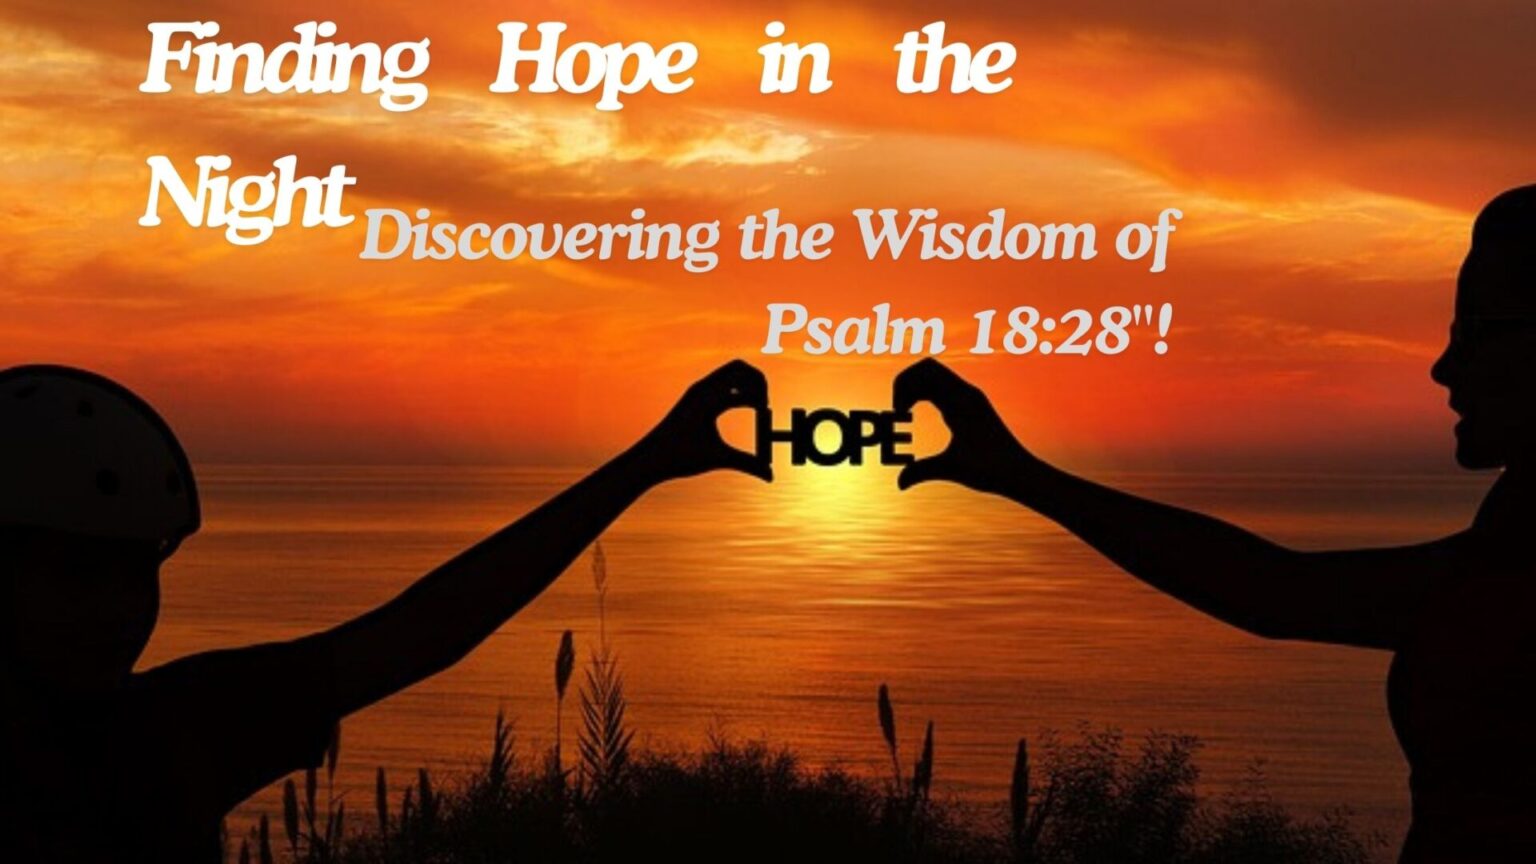 "Finding Hope in the Night: Discovering the Wisdom of Psalm 18:28"